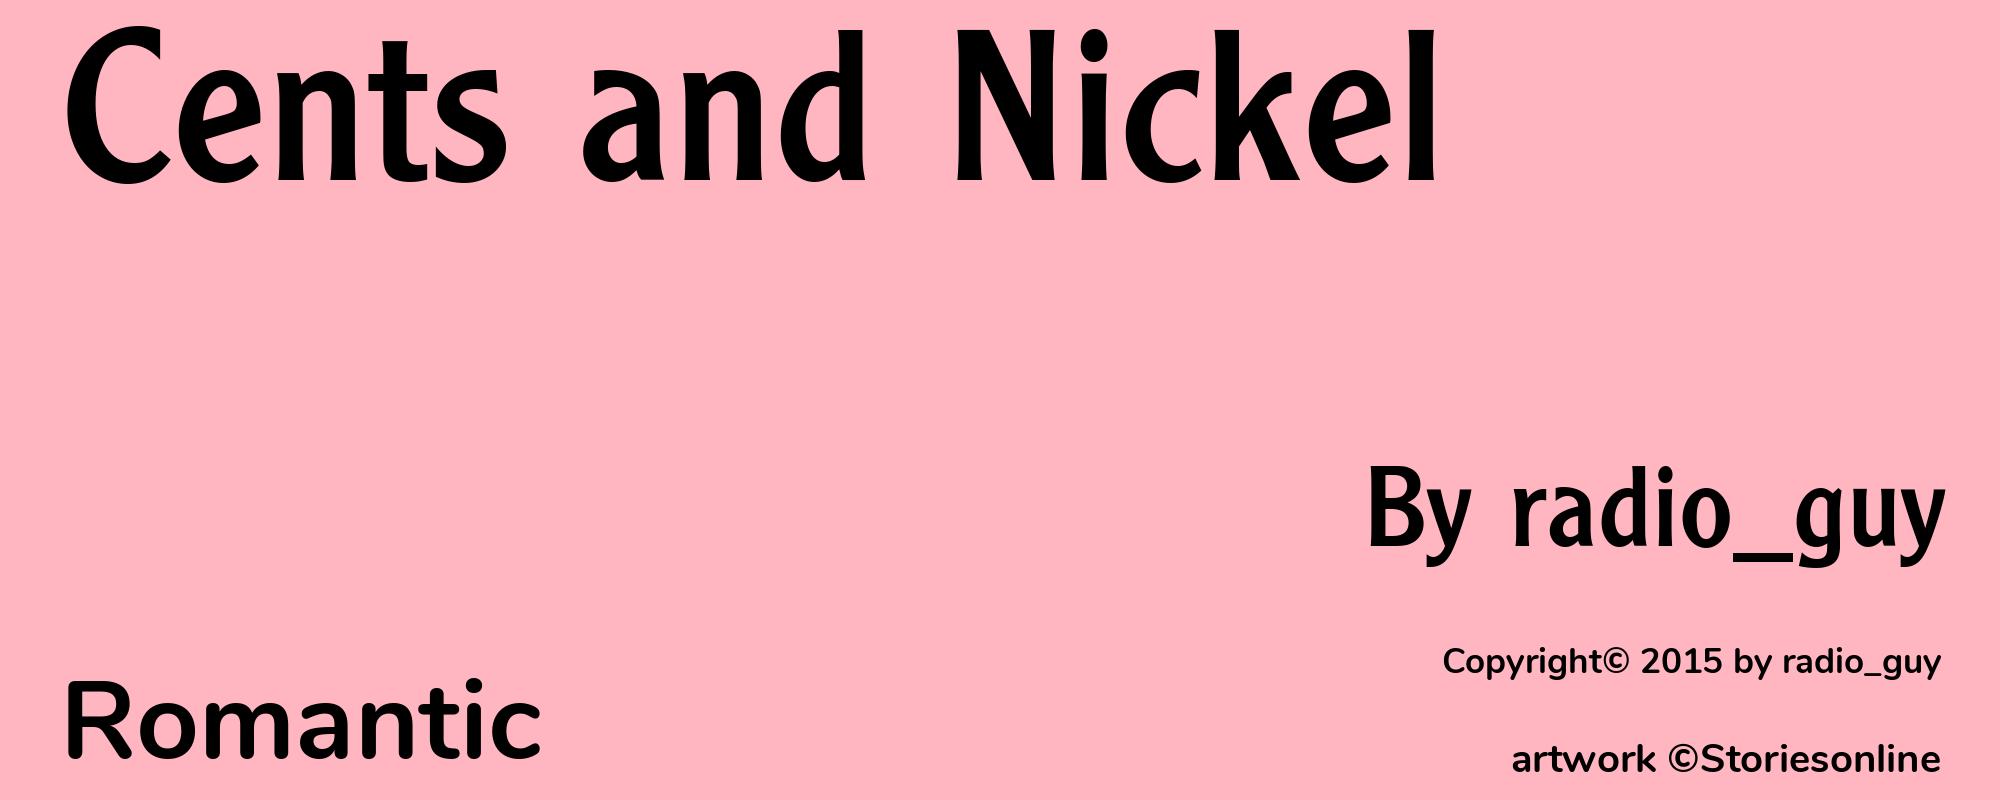 Cents and Nickel - Cover